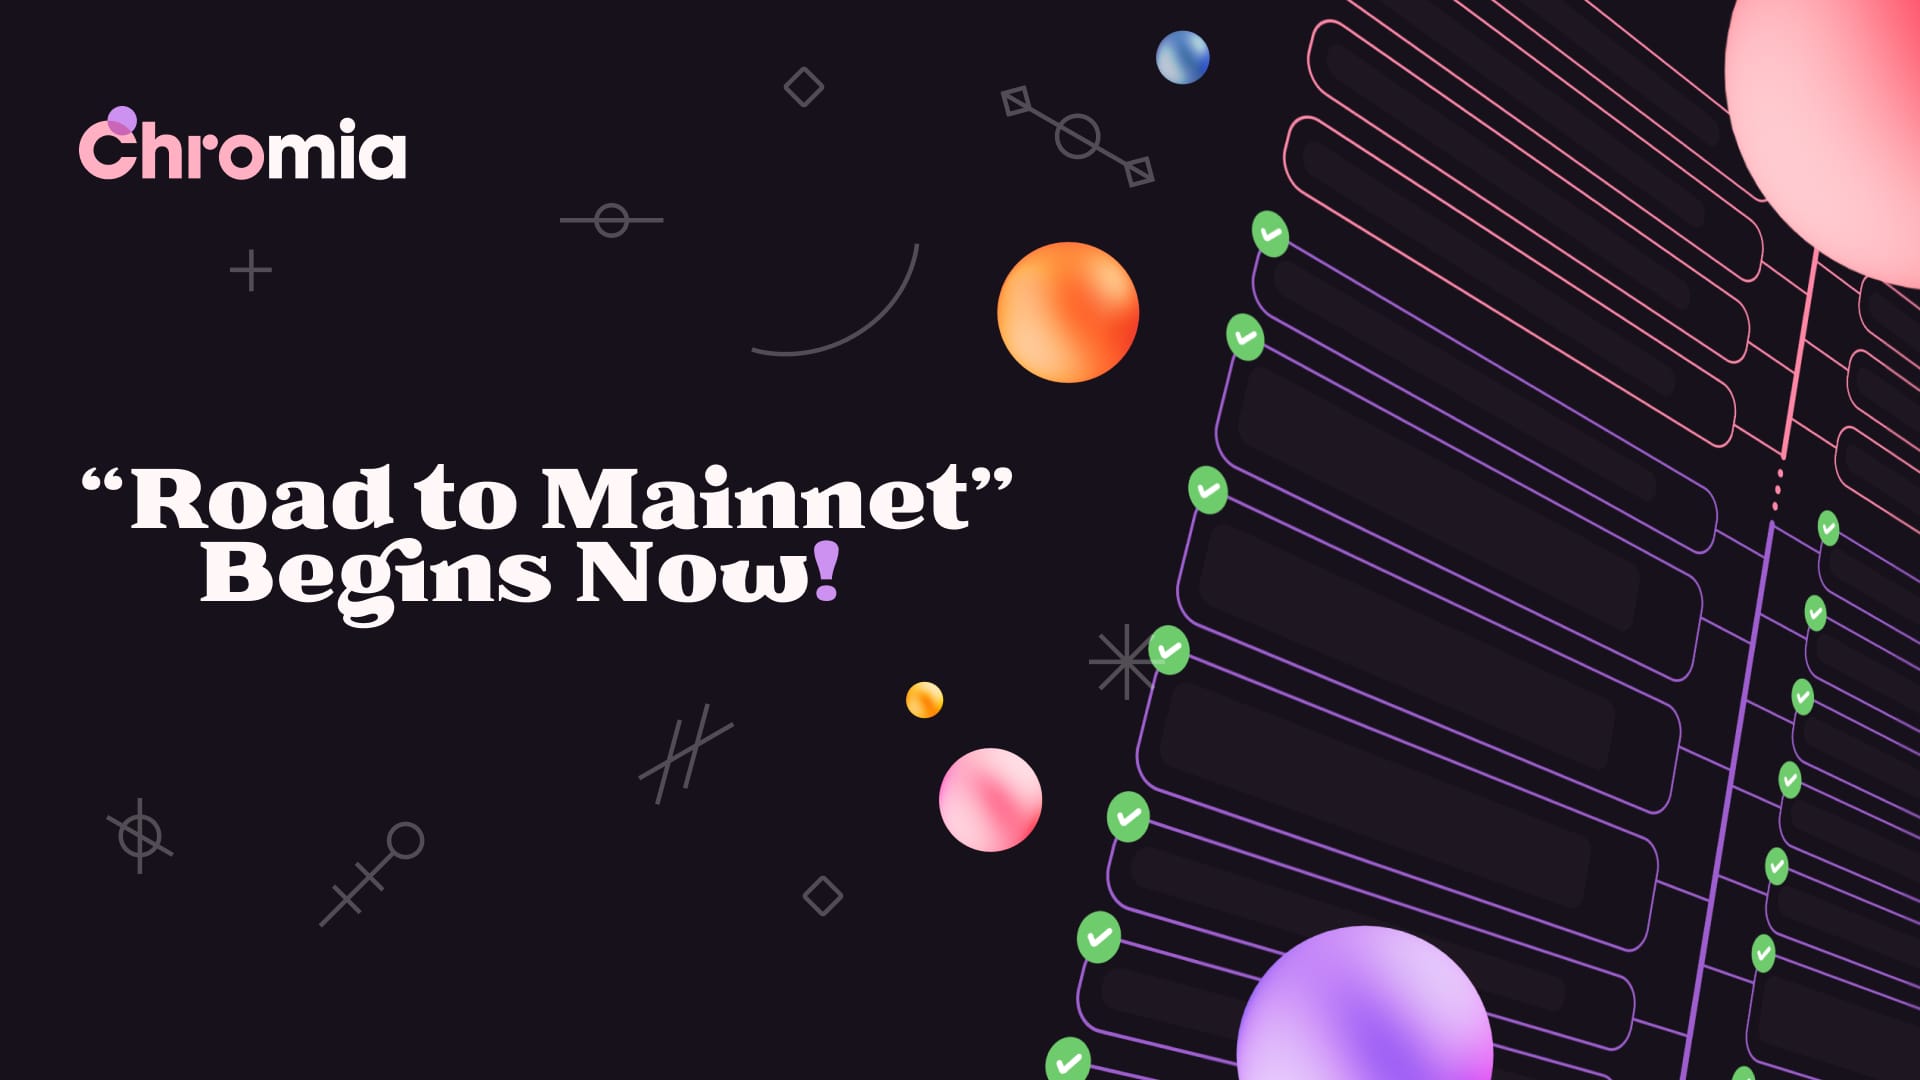 Chromia’s “Road to Mainnet” Begins Now